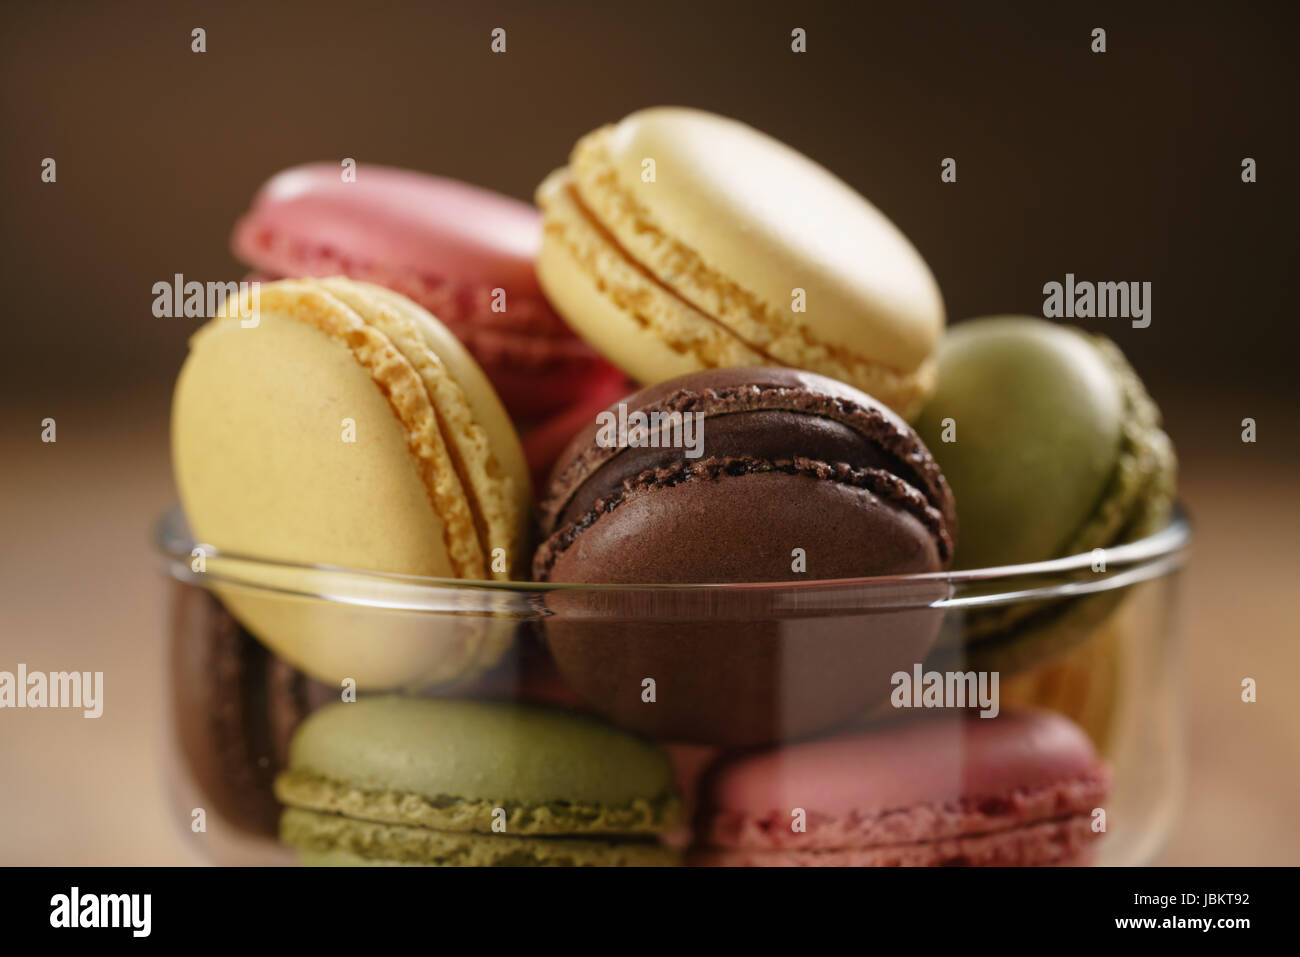 assorted macarons in glass bowl on wood table Stock Photo